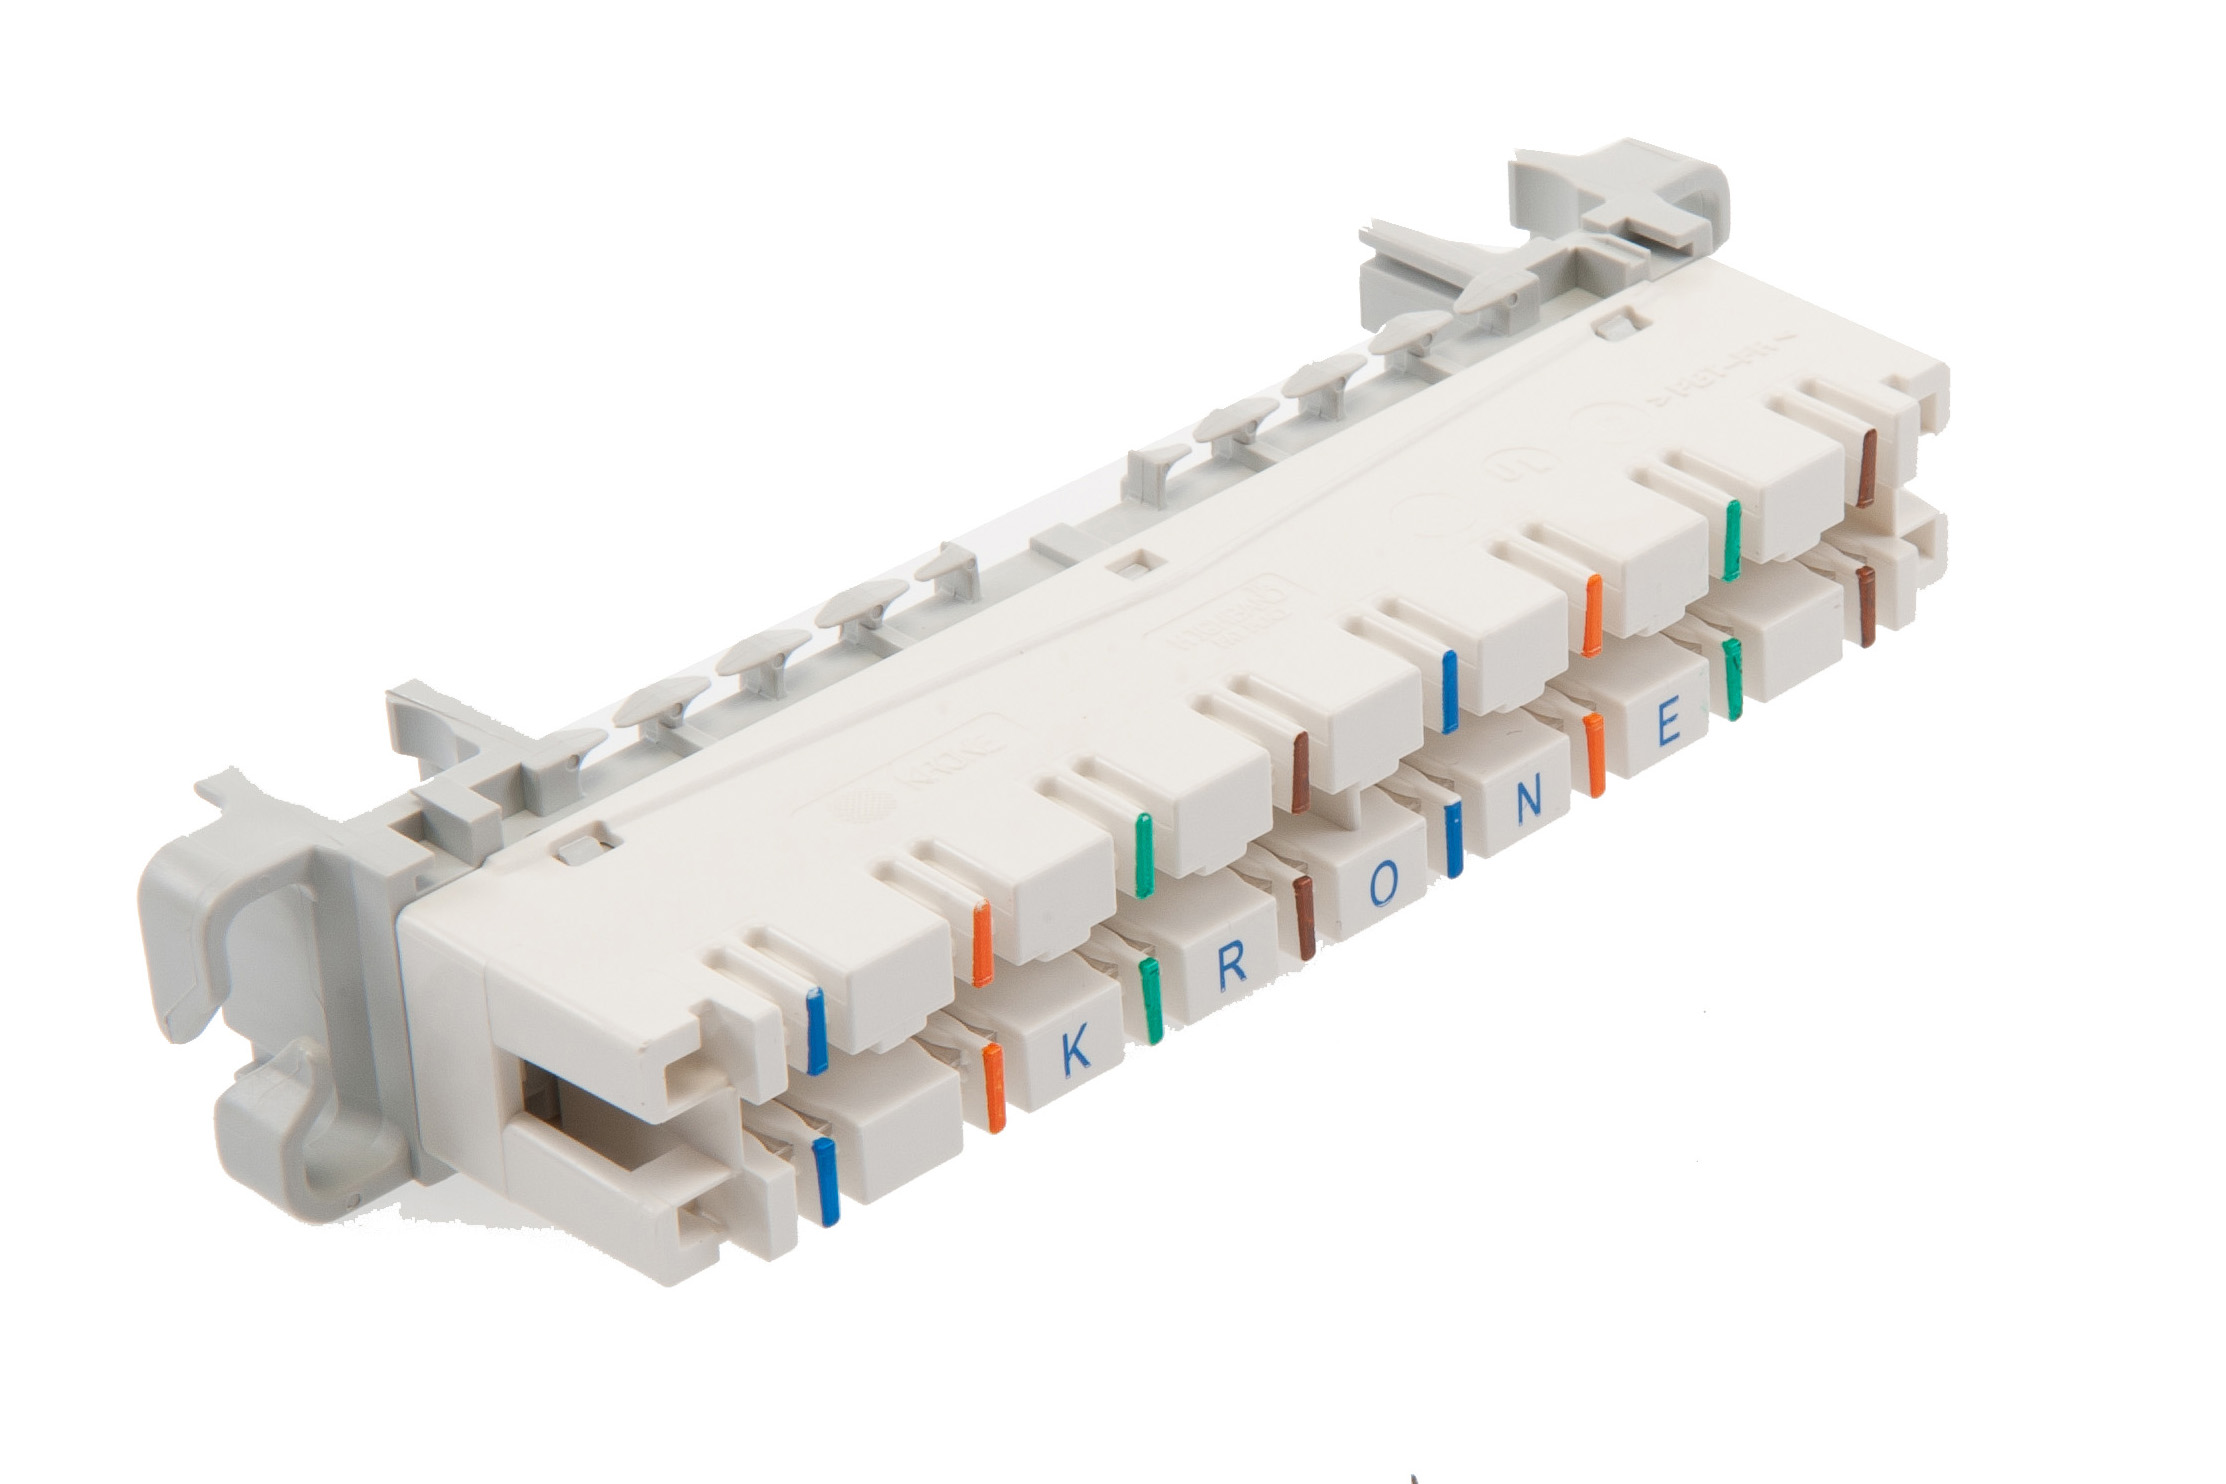 HIGHBAND Cat 6 8-pair Module ULTIM8. Suits both profil and backmount frames. Price per box of 10